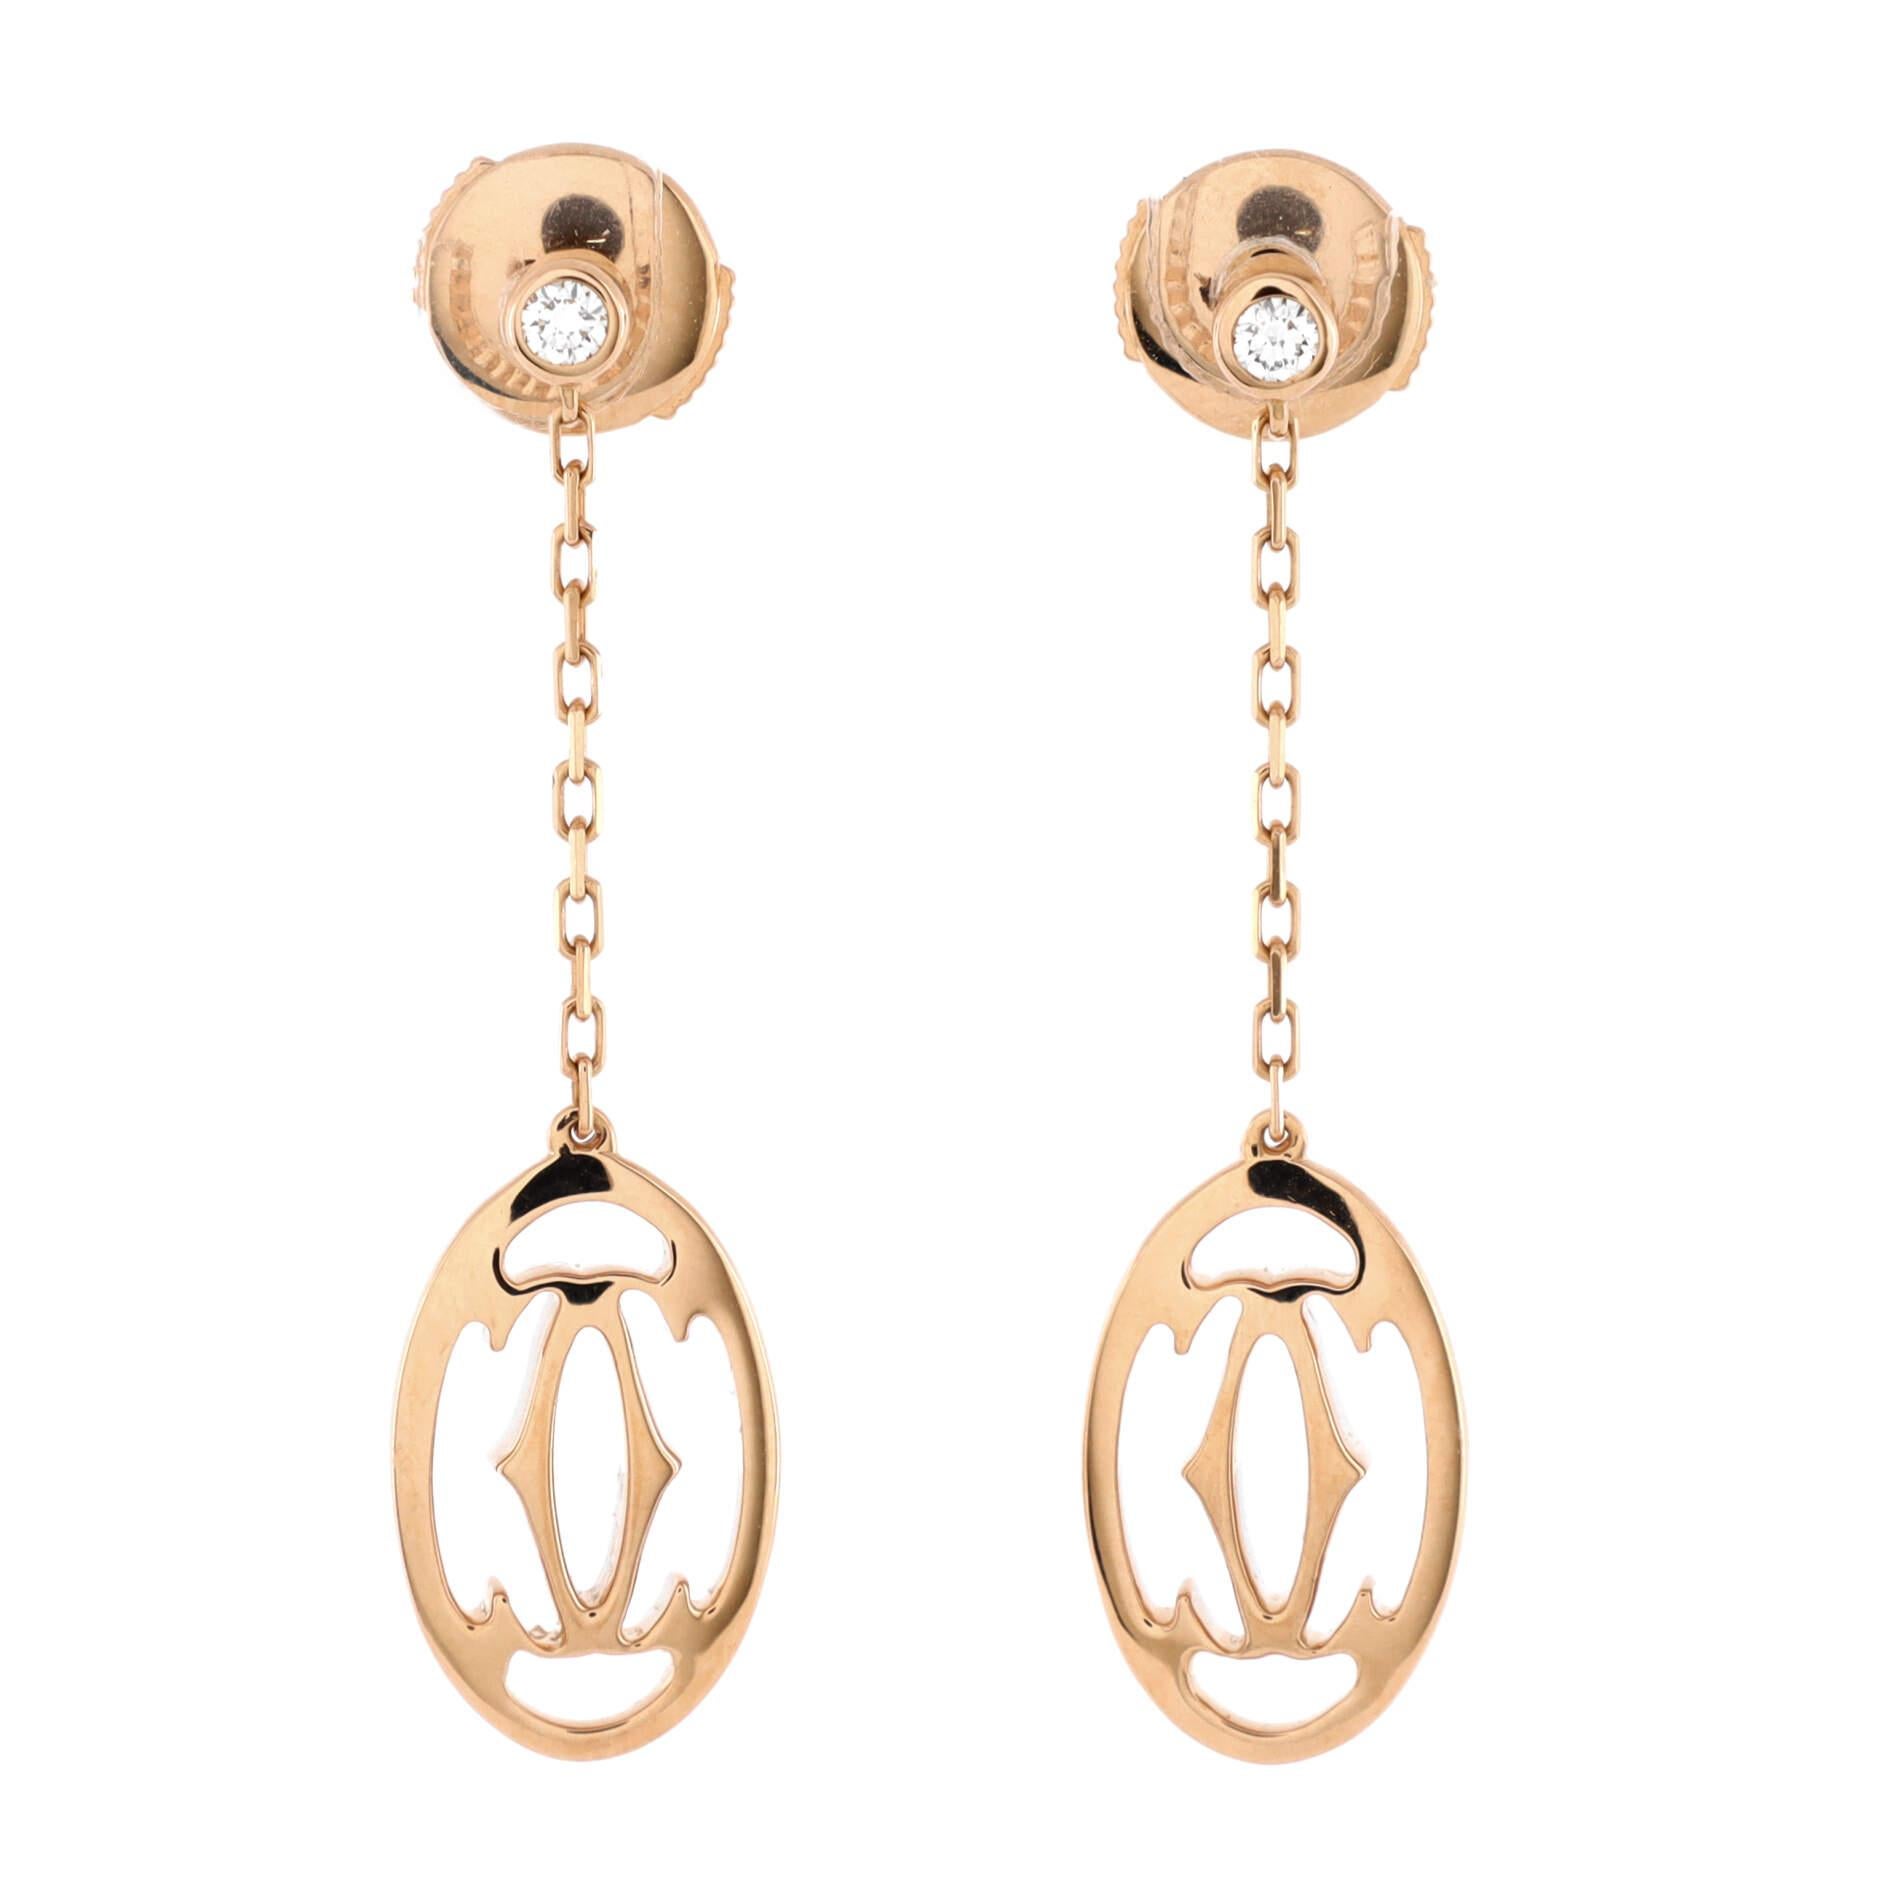 Condition: Great. Minor wear throughout.
Accessories:
Measurements: Height/Length: 35.80 mm, Width: 9.30 mm
Designer: Cartier
Model: Double C de Cartier Drop Earrings 18K Rose Gold with Diamonds
Exterior Color: Rose Gold
Item Number: 224640/3